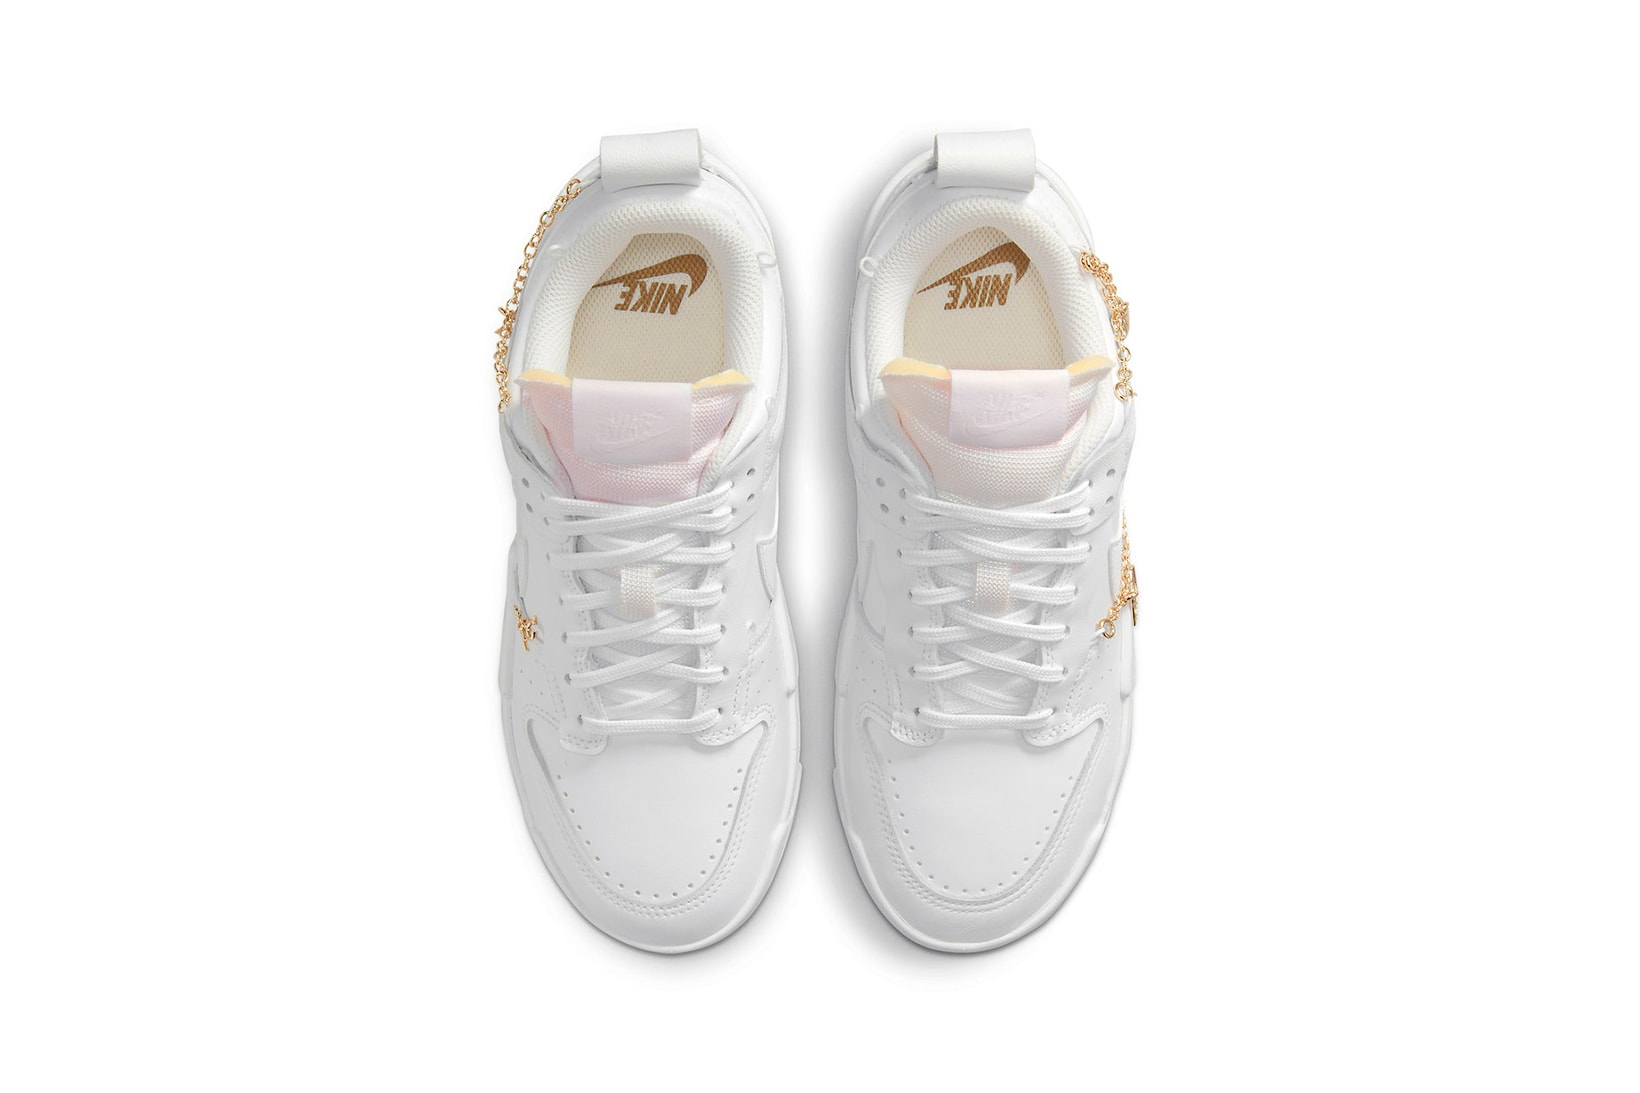 Nike Womens Sneakers Dunk Low Disrupt Gold Charms White Light Pink Footwear Kicks Shoes Top View Insole